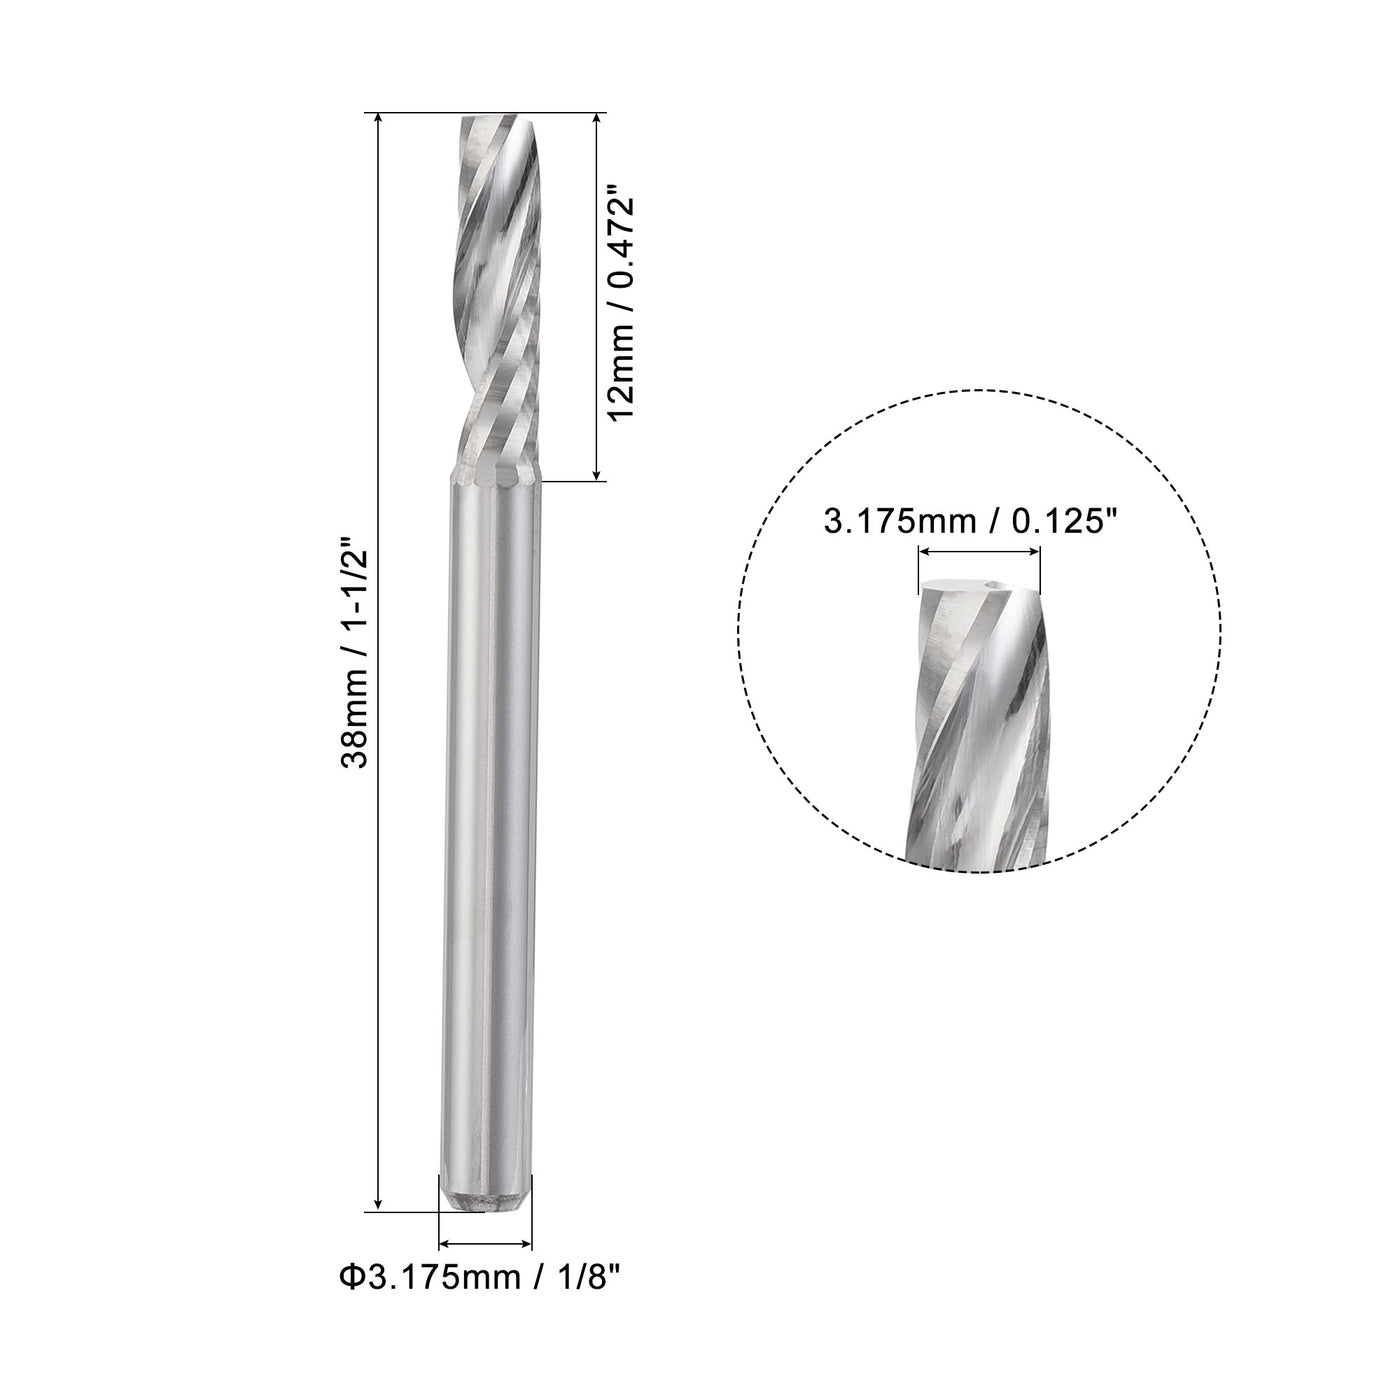 uxcell Uxcell 1/8" Shank 1mmx3mm Carbide Single Flute CNC Spiral Router Bit for PVC MDF Wood